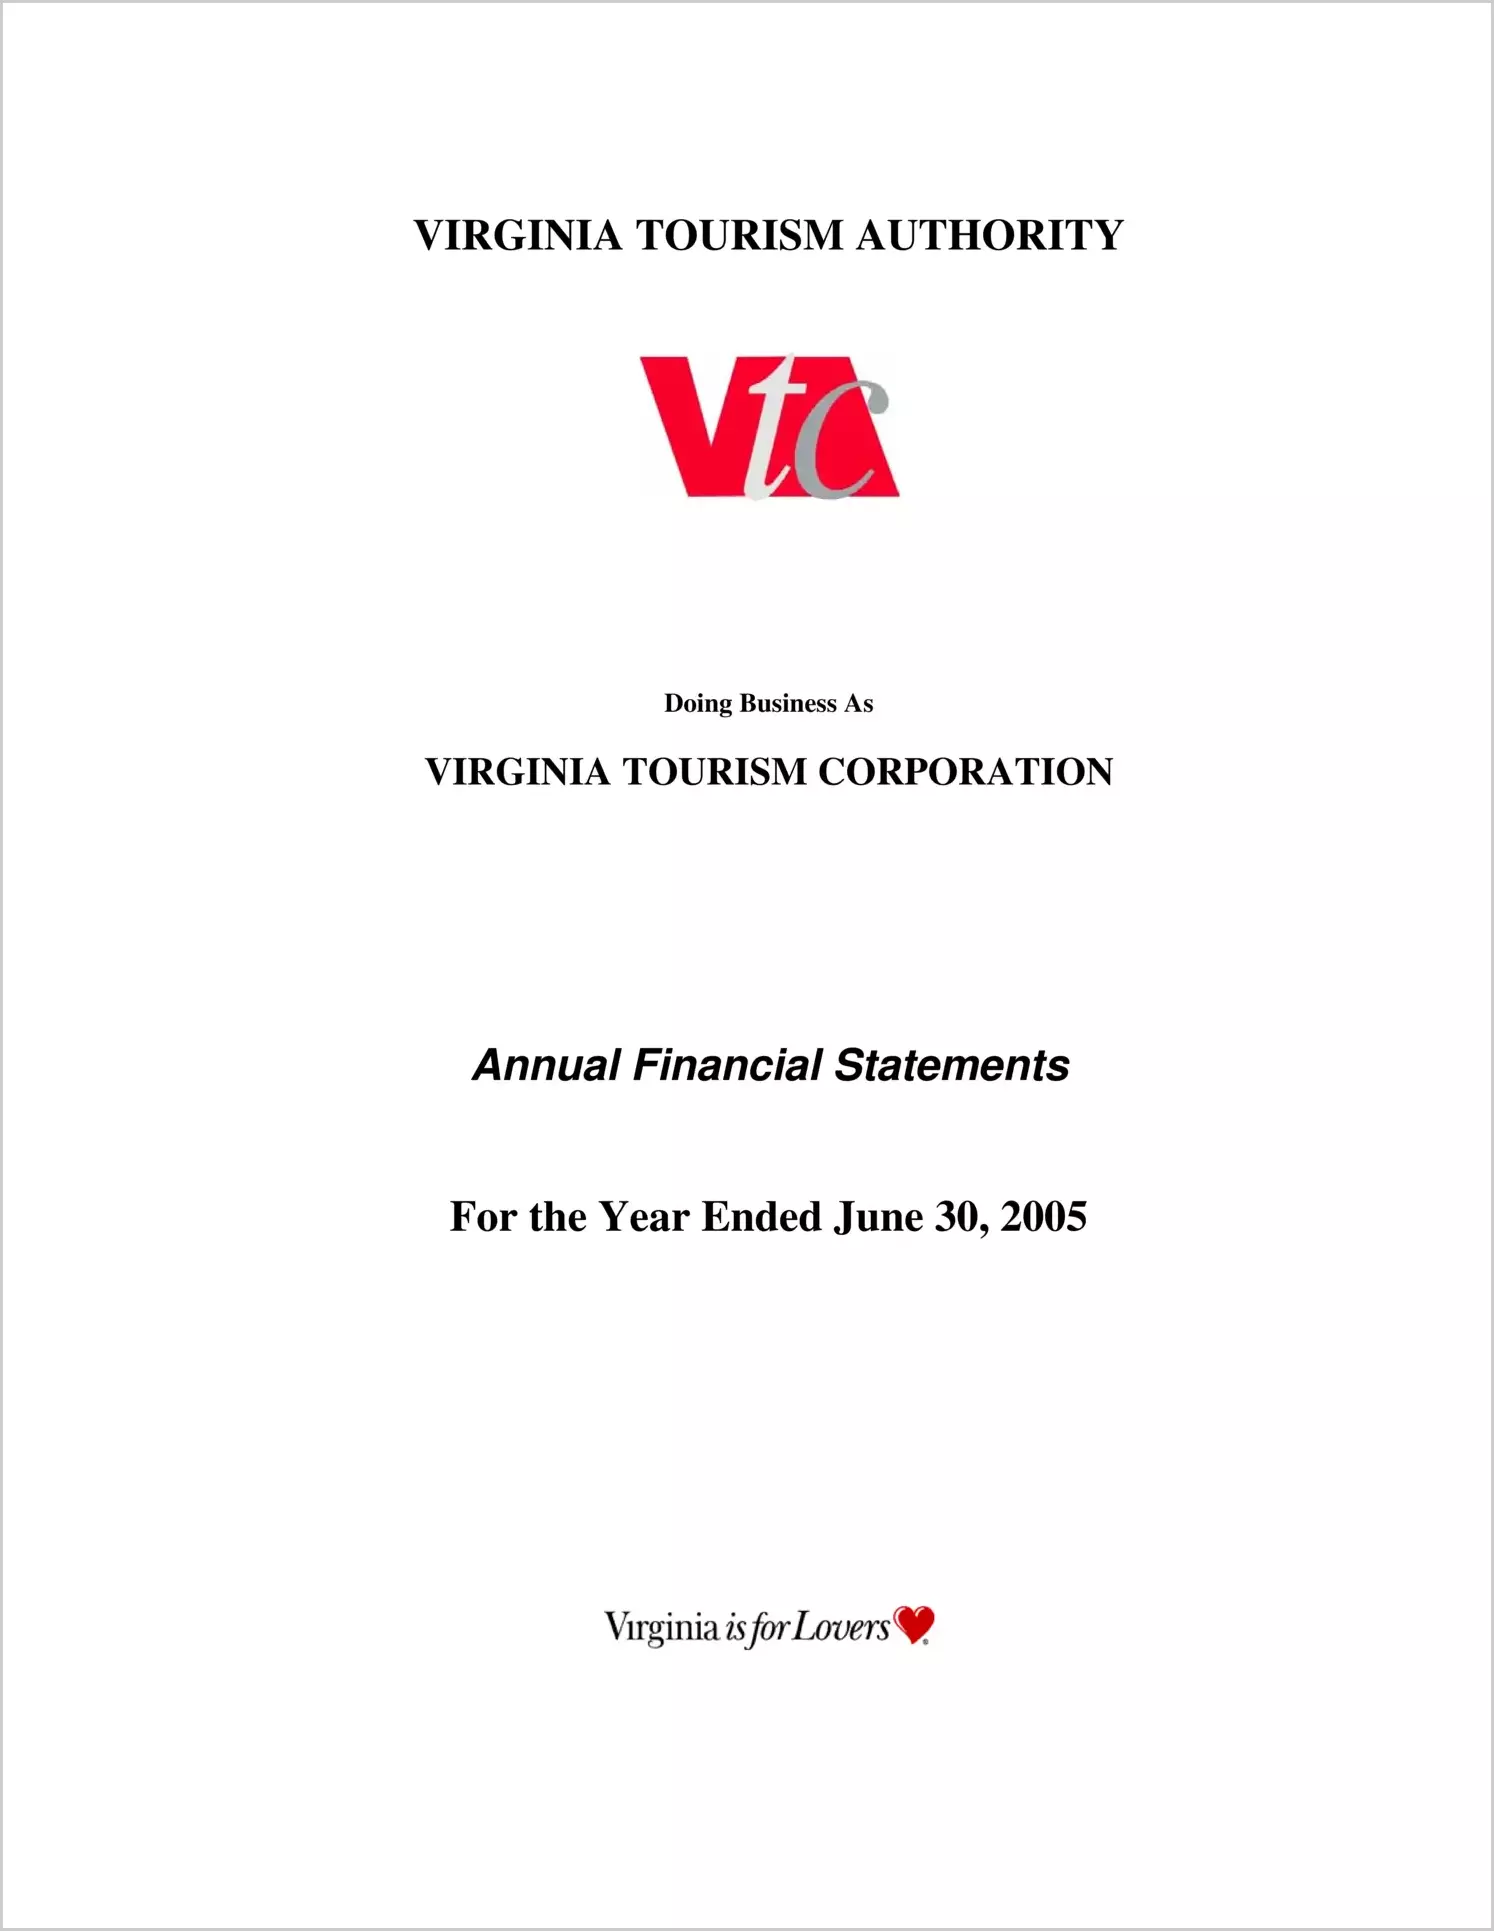 Virginia Tourism Authority for the year ended June 30, 2005